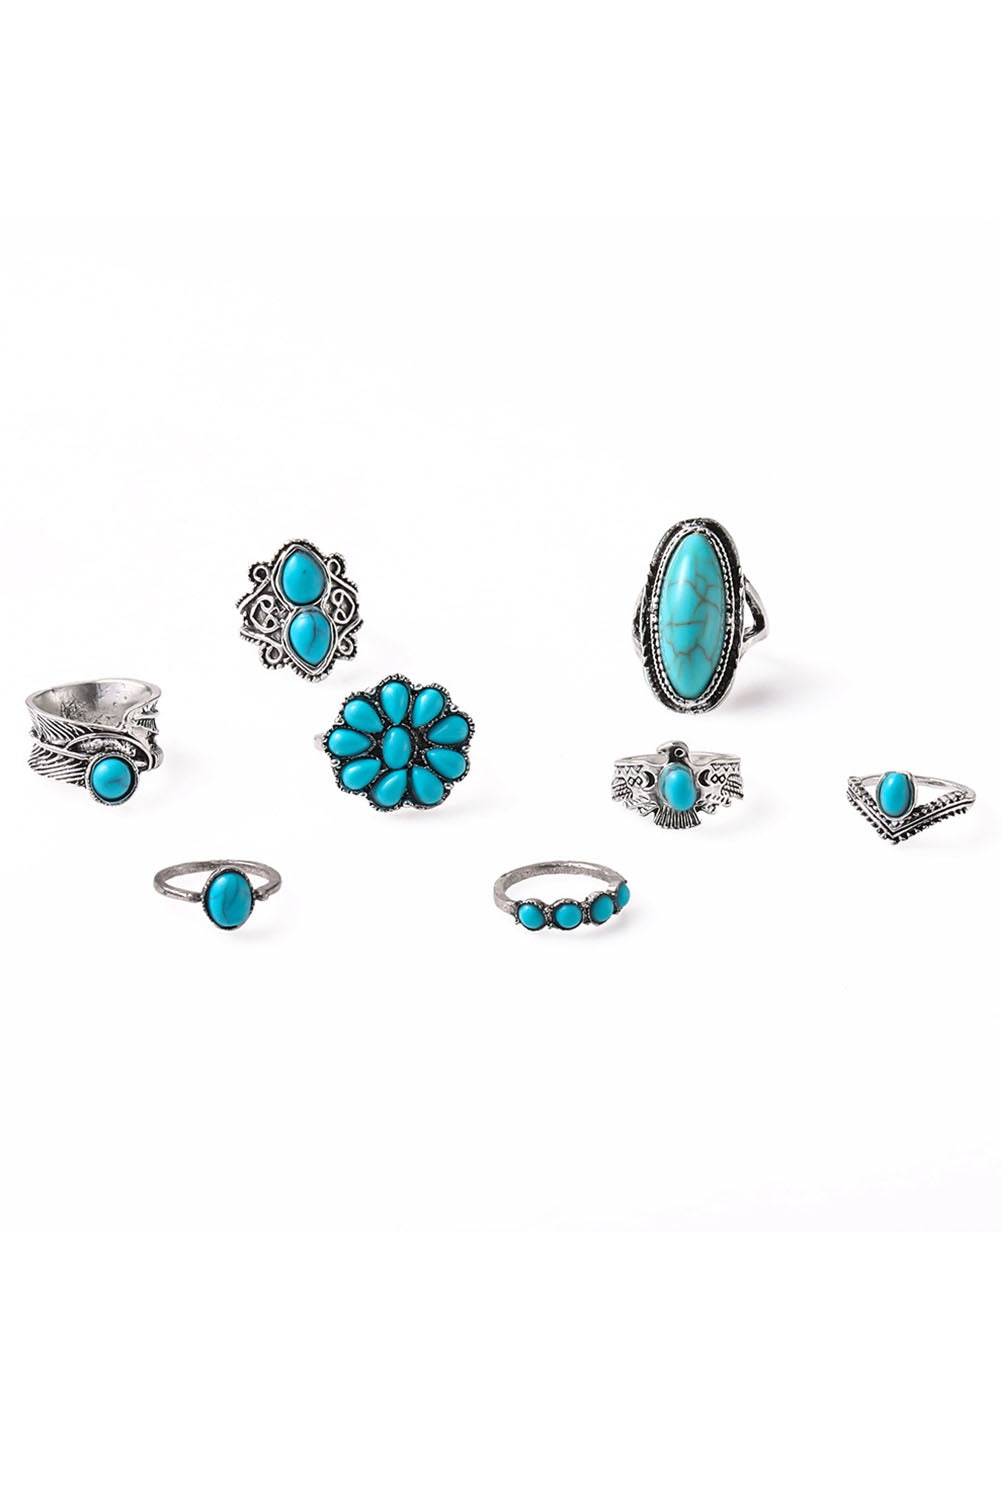 Green 8Pcs Vintage Turquoise Ring Set - Bellisima Clothing Collective